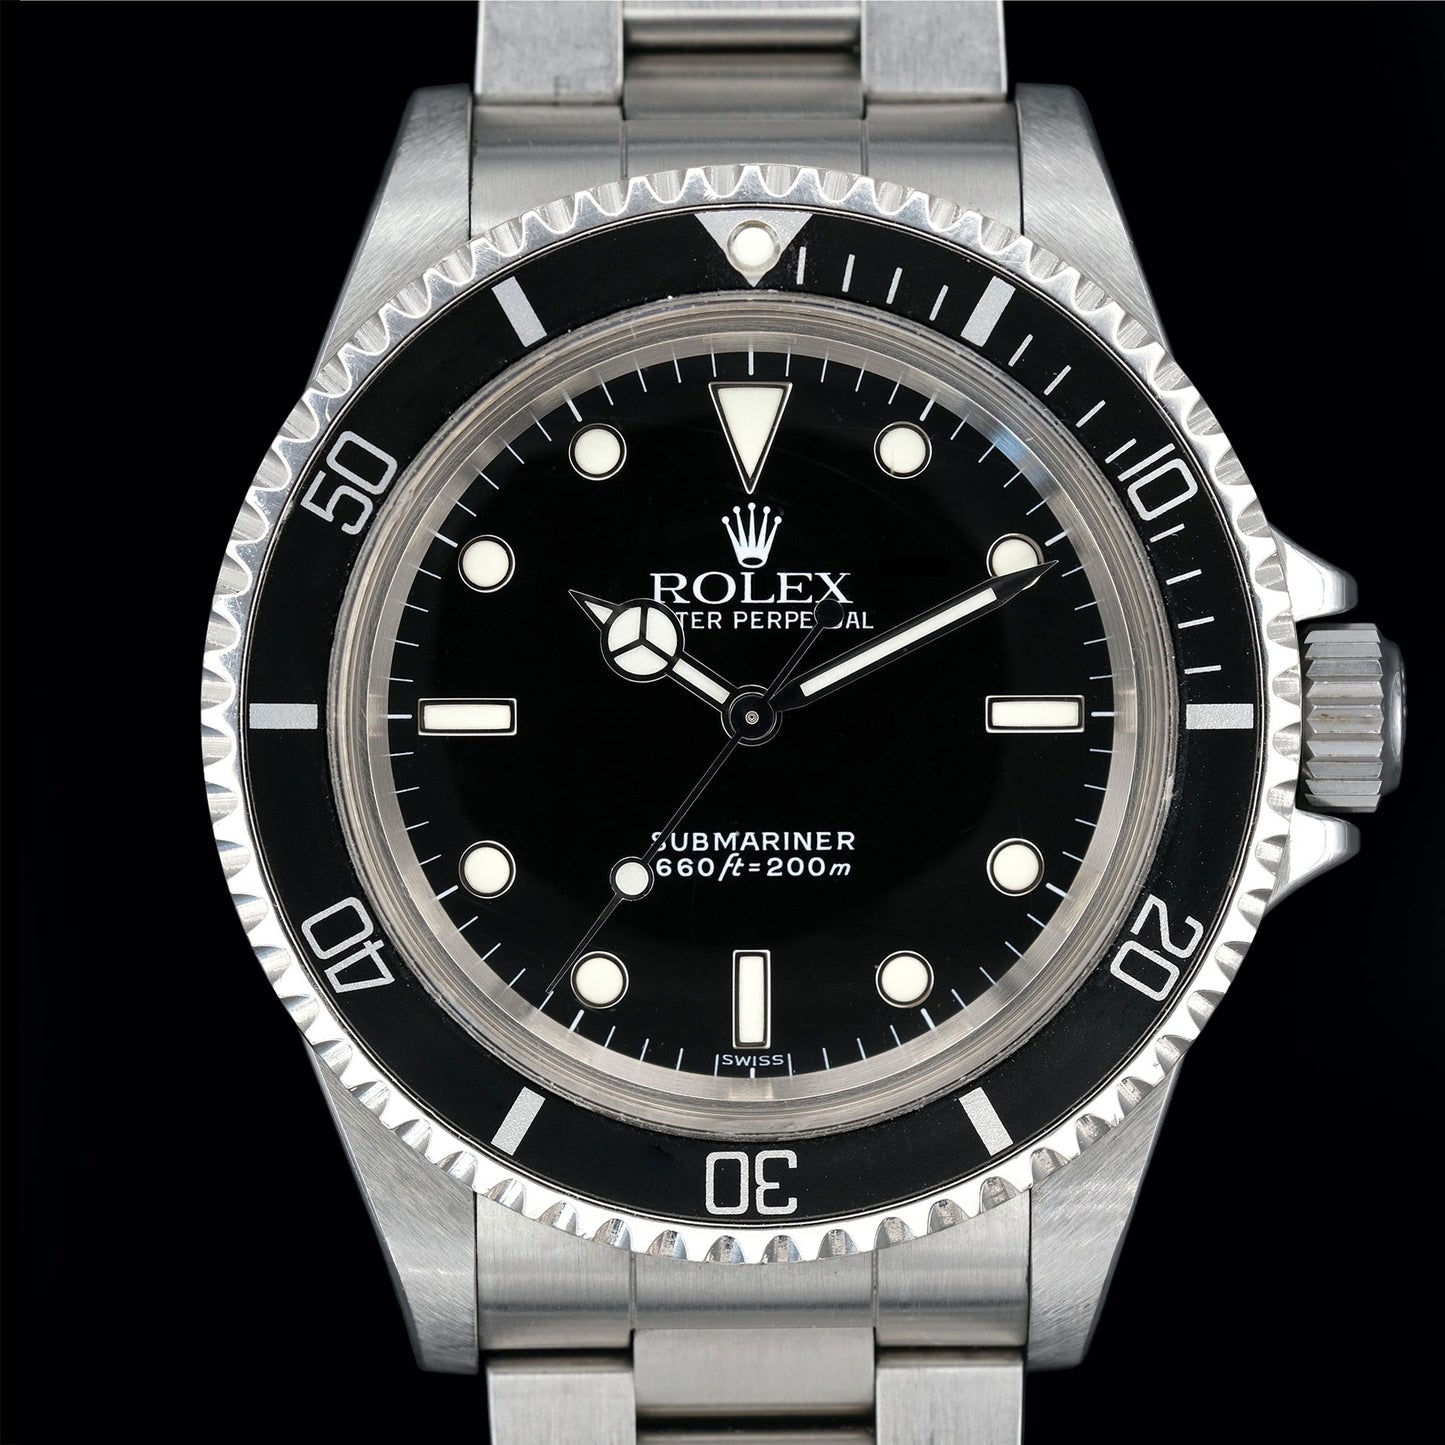 Rolex Submariner ref.5513 "Swiss only" from 1985